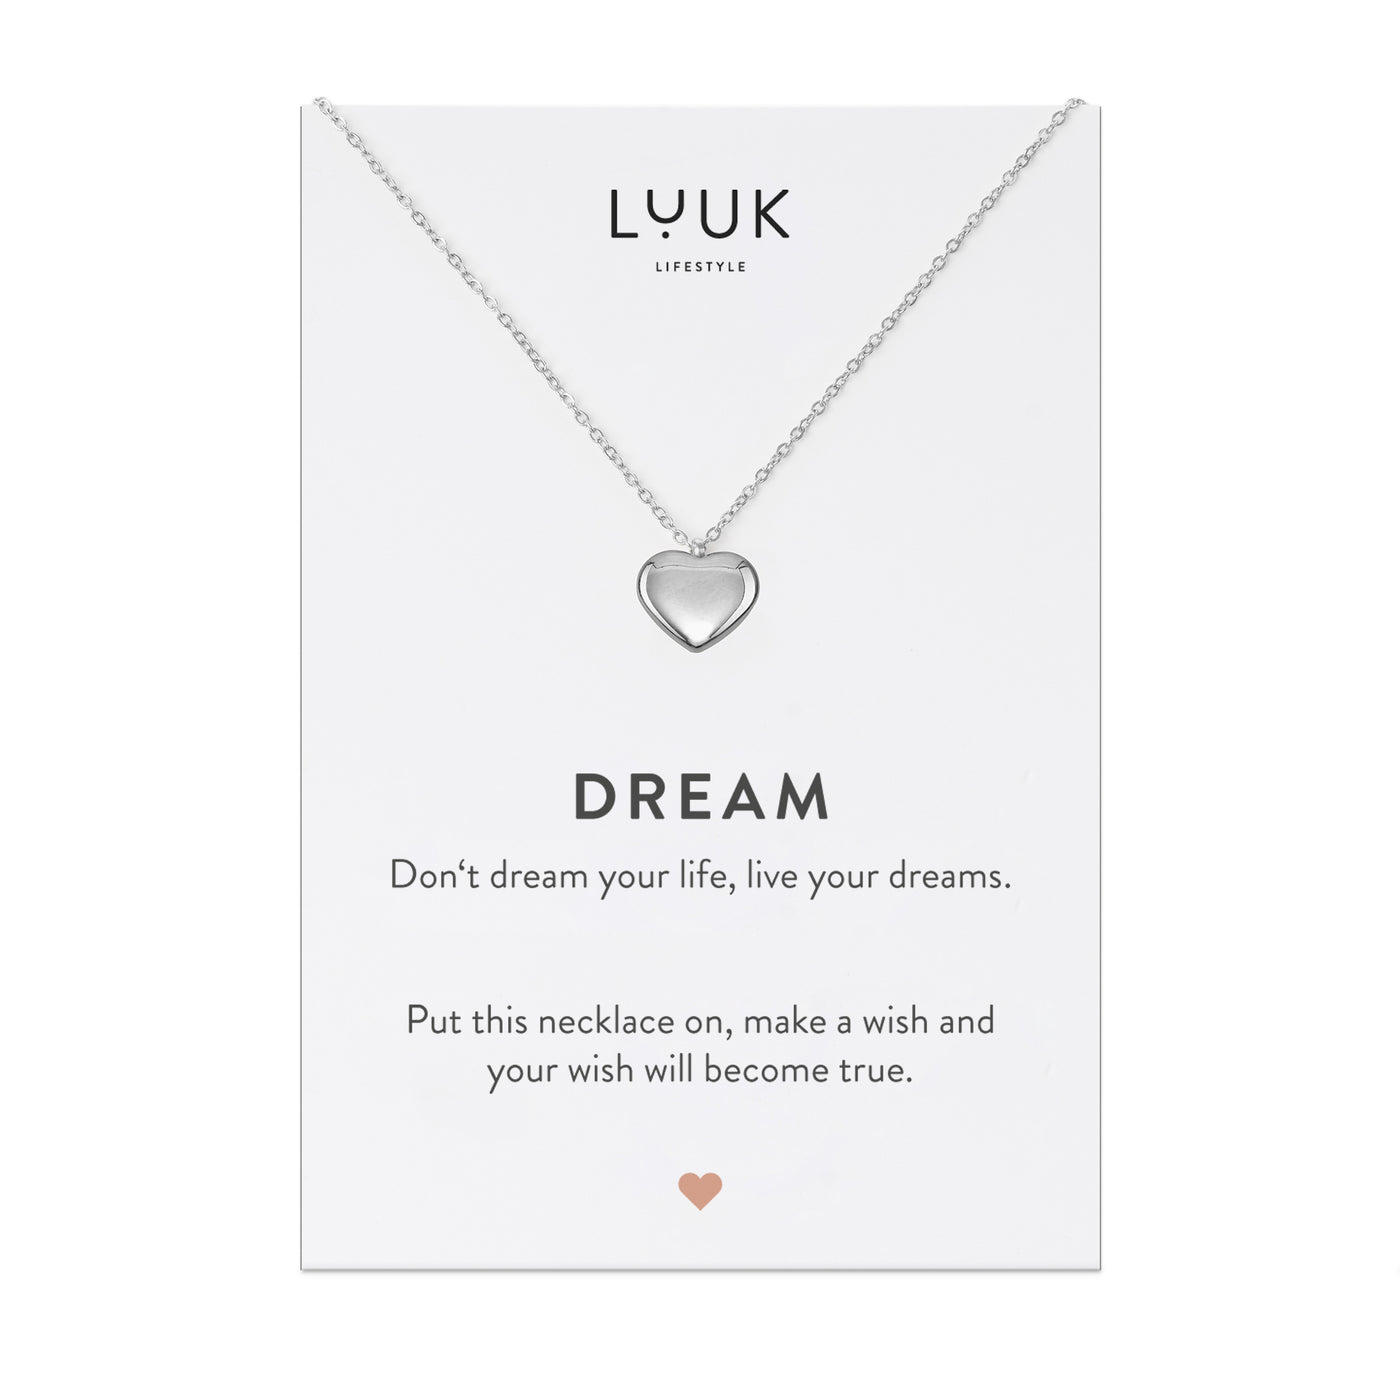 Necklace with heart pendant and Dream greeting card